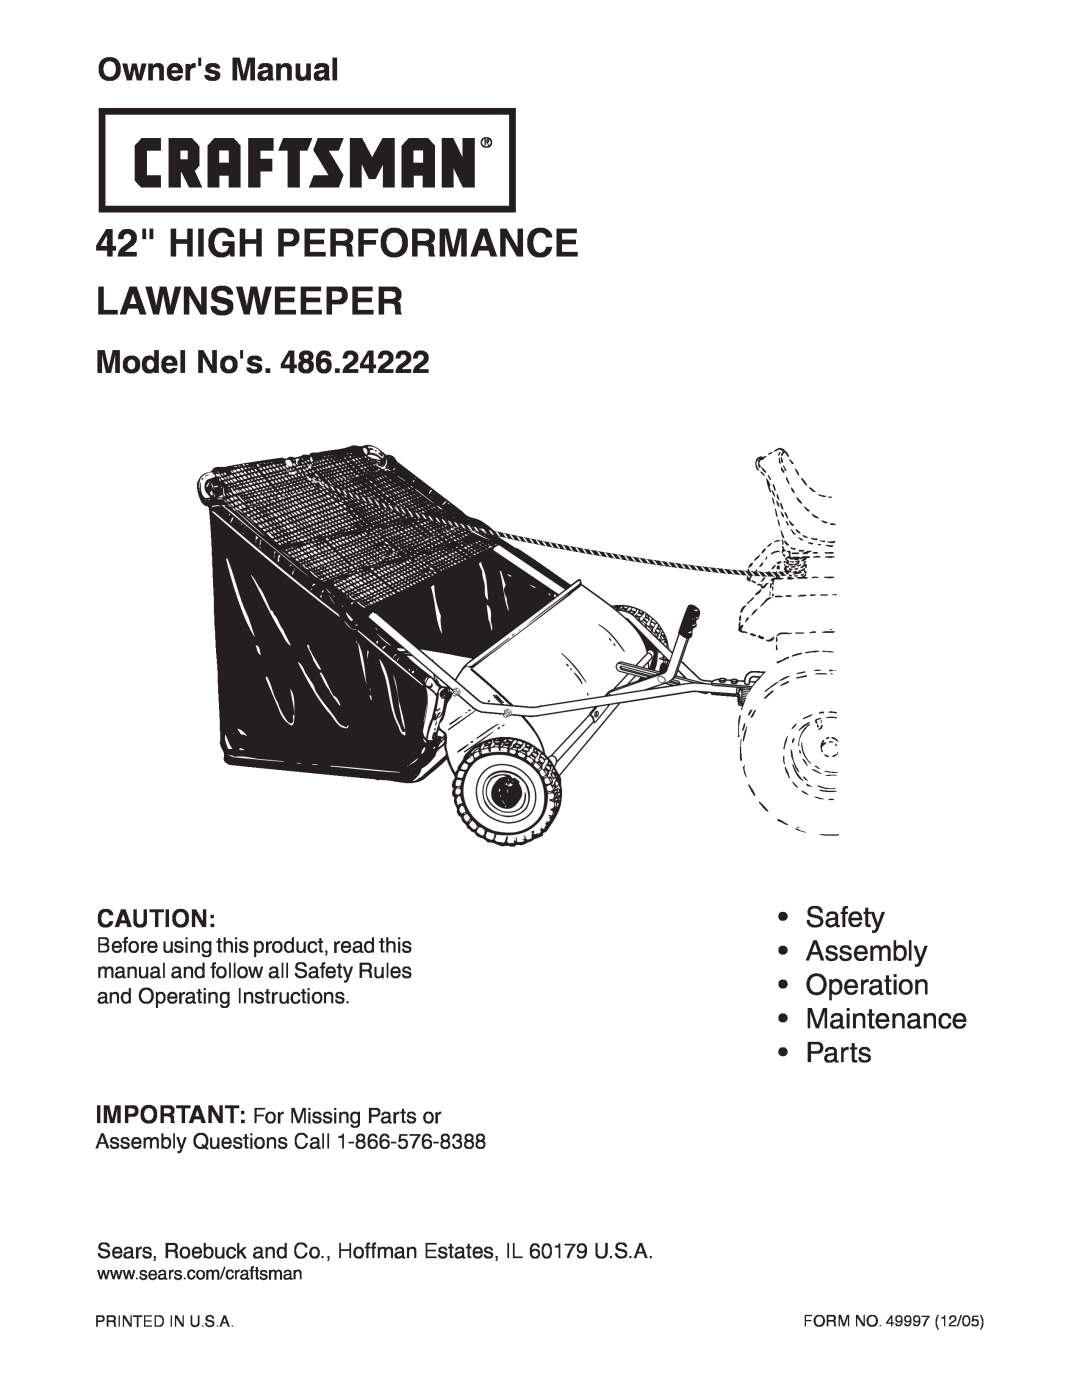 Craftsman 486.24222 owner manual High Performance Lawnsweeper, Owners Manual, Model Nos, FORM NO. 49997 12/05 